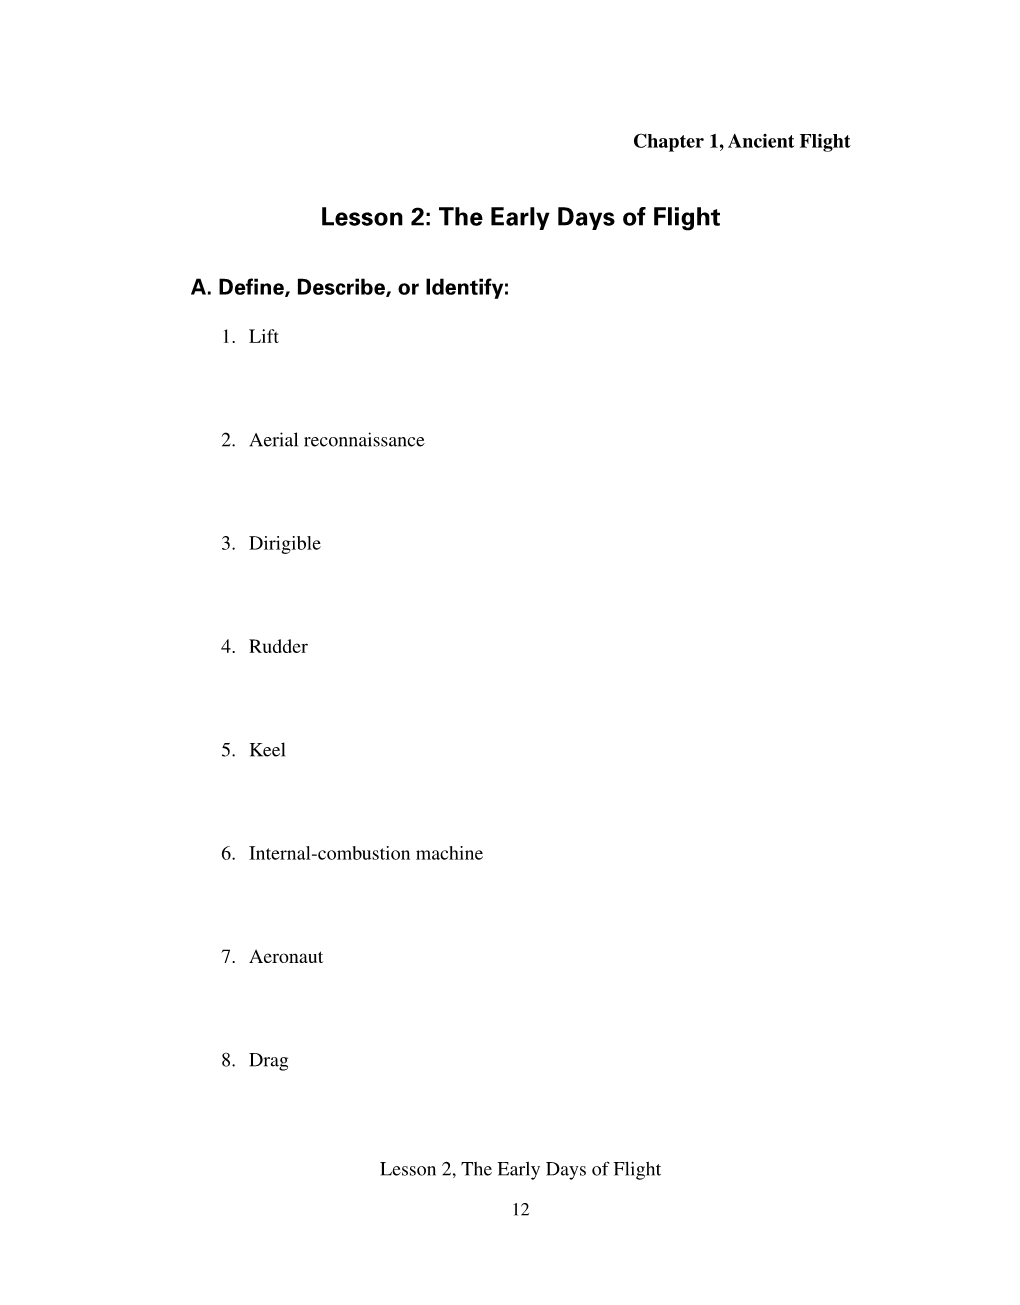 Lesson 2: the Early Days of Flight